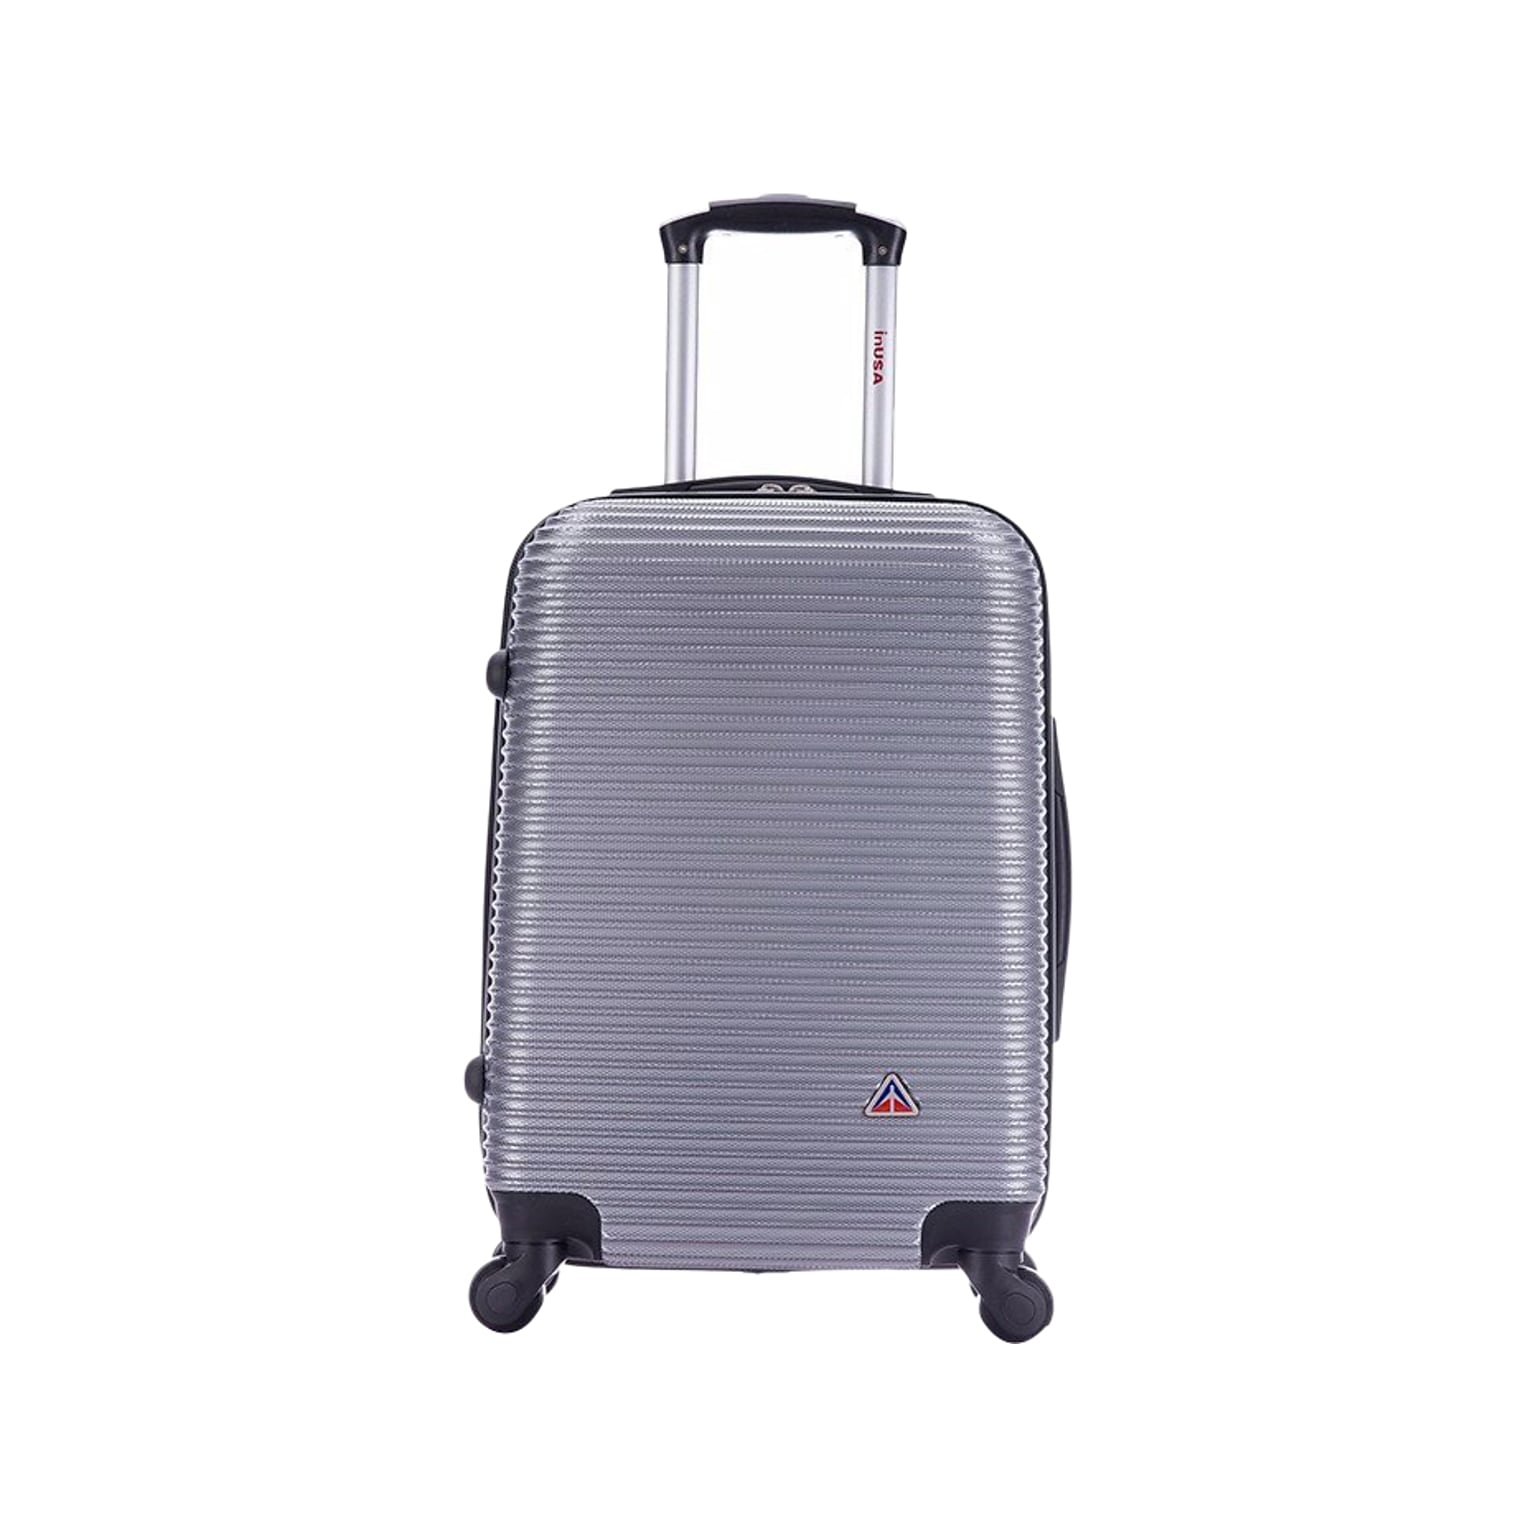 InUSA Royal 20 Hardside Carry-On Suitcase, 4-Wheeled Spinner, Silver (IUROY00S-SIL)